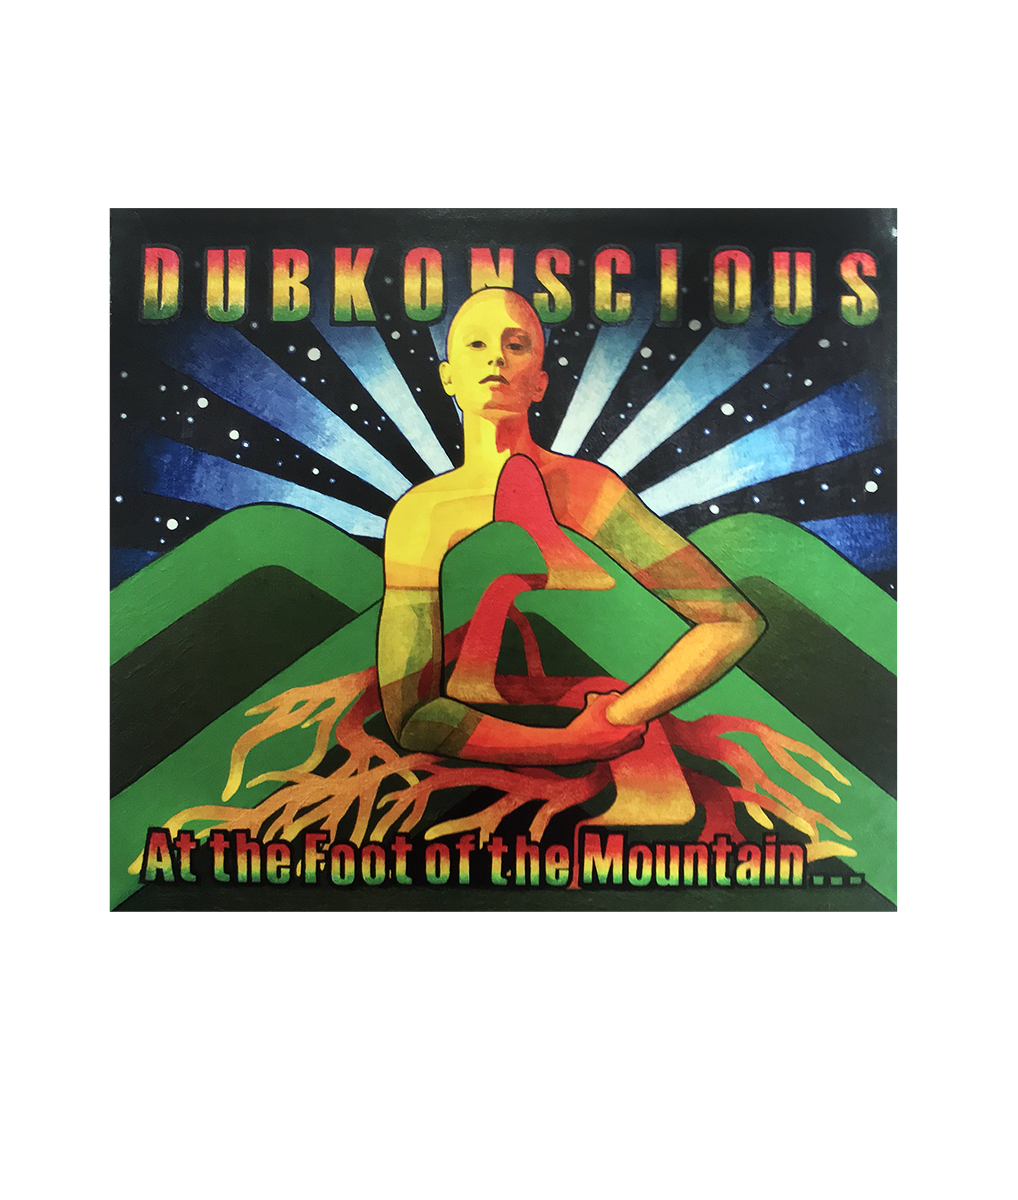 Dubkonscious - At the Foot of the Mountain... CD